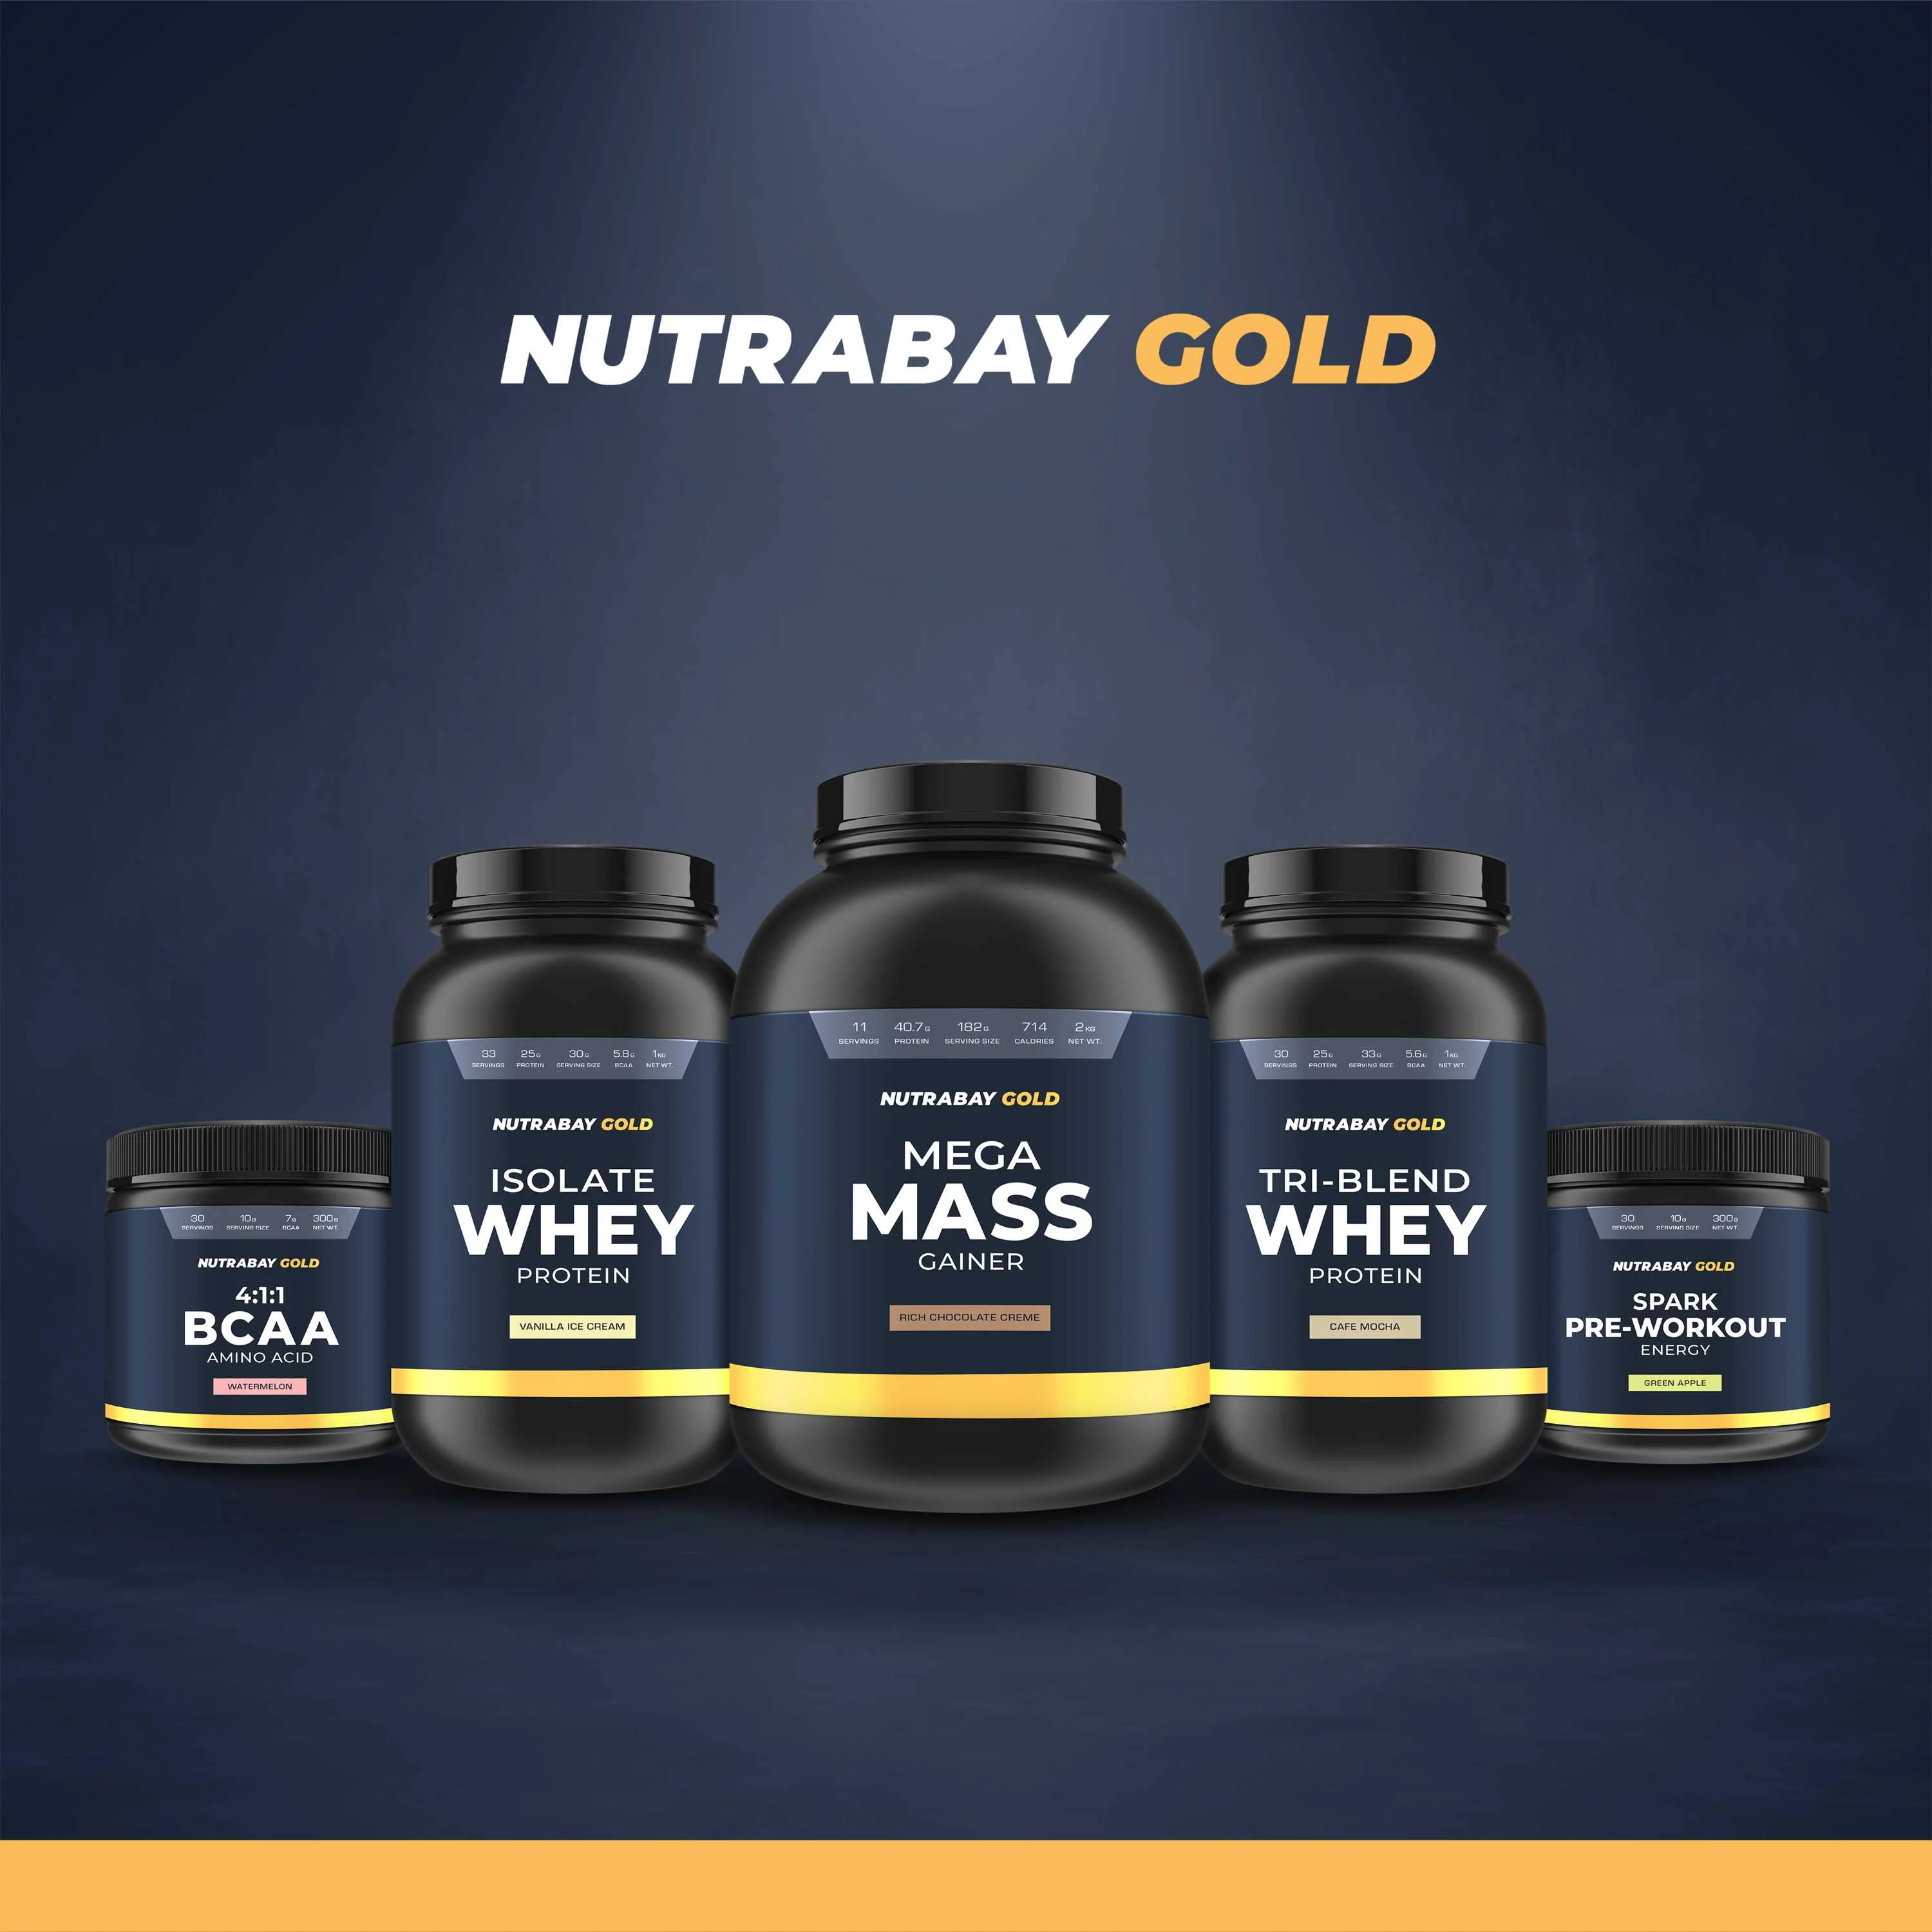 Nutrabay Gold 100% Whey Protein Isolate